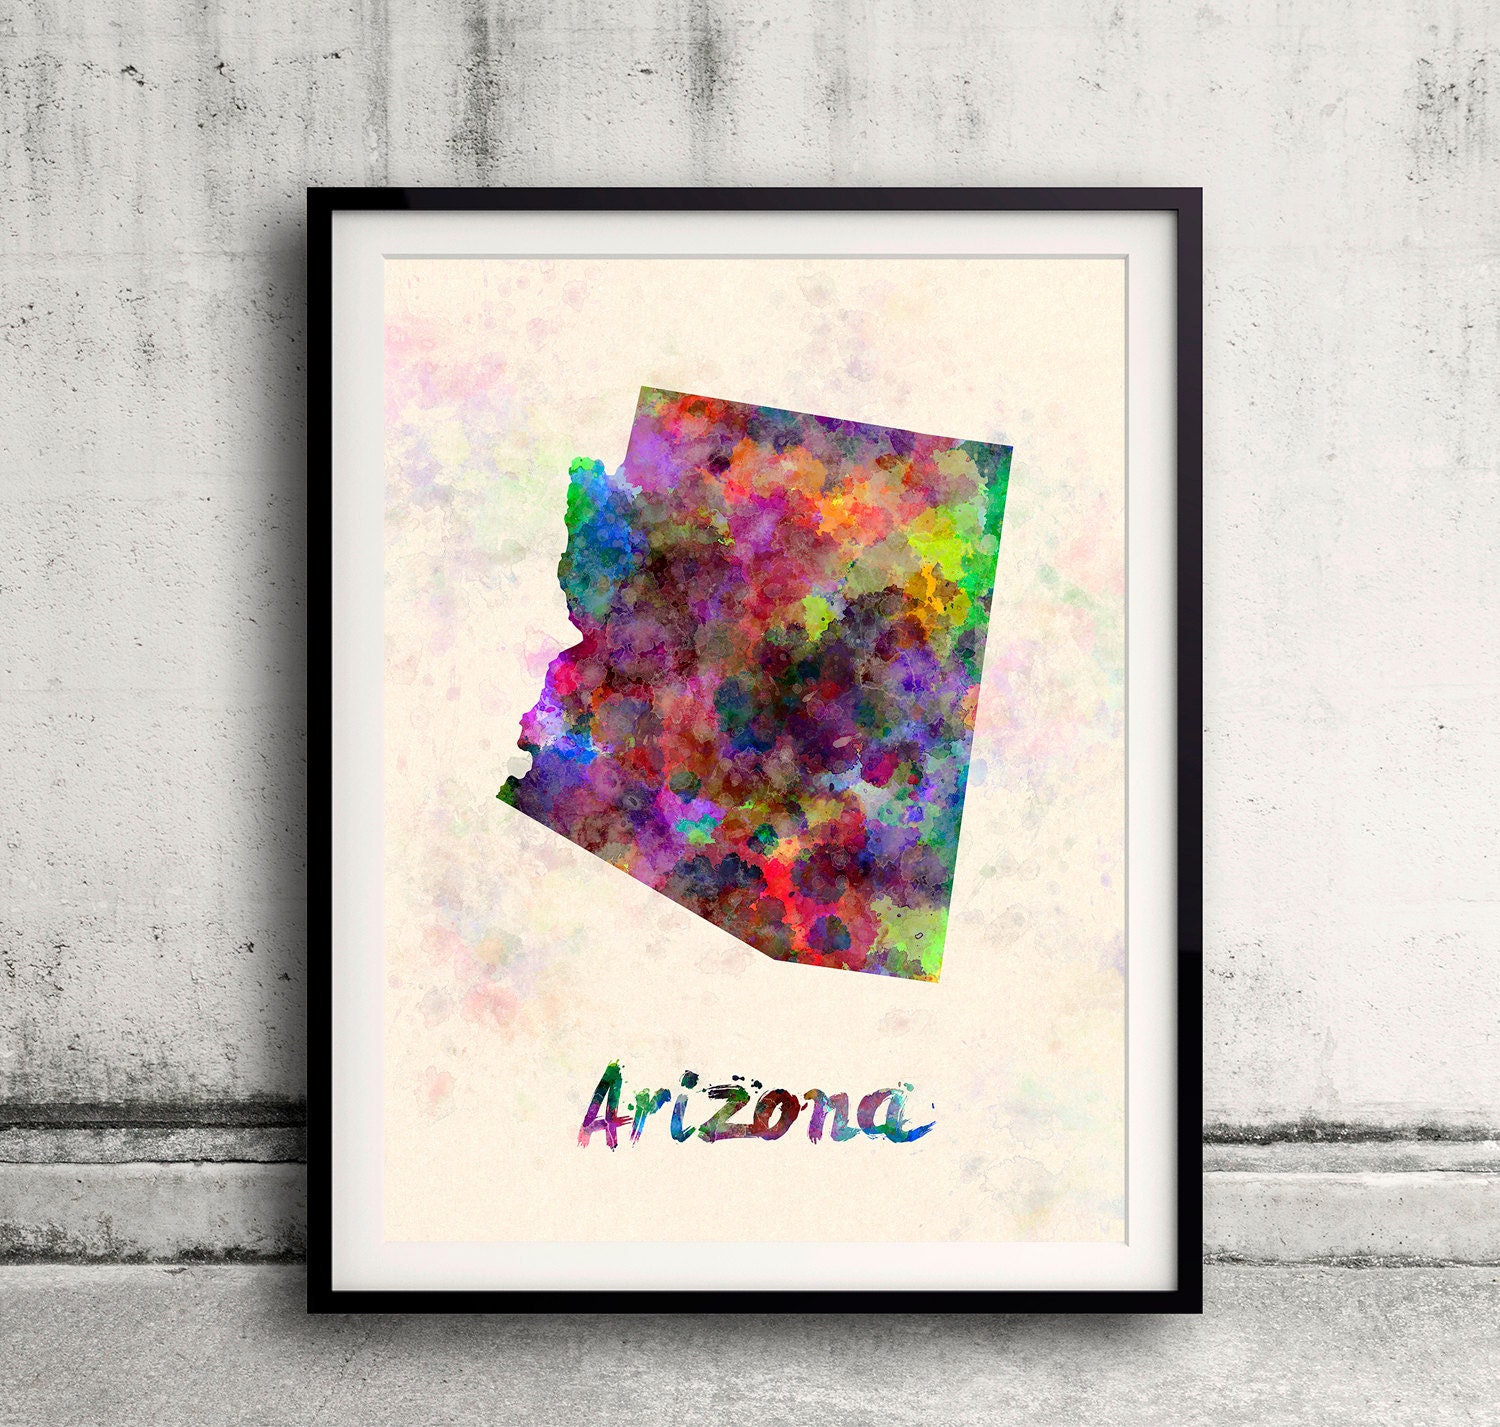 Arizona Us State in Watercolor Background 8x10 In. To 12x16 Poster Digital Wall Art Illustration Print Art Decorative - Sku 0391